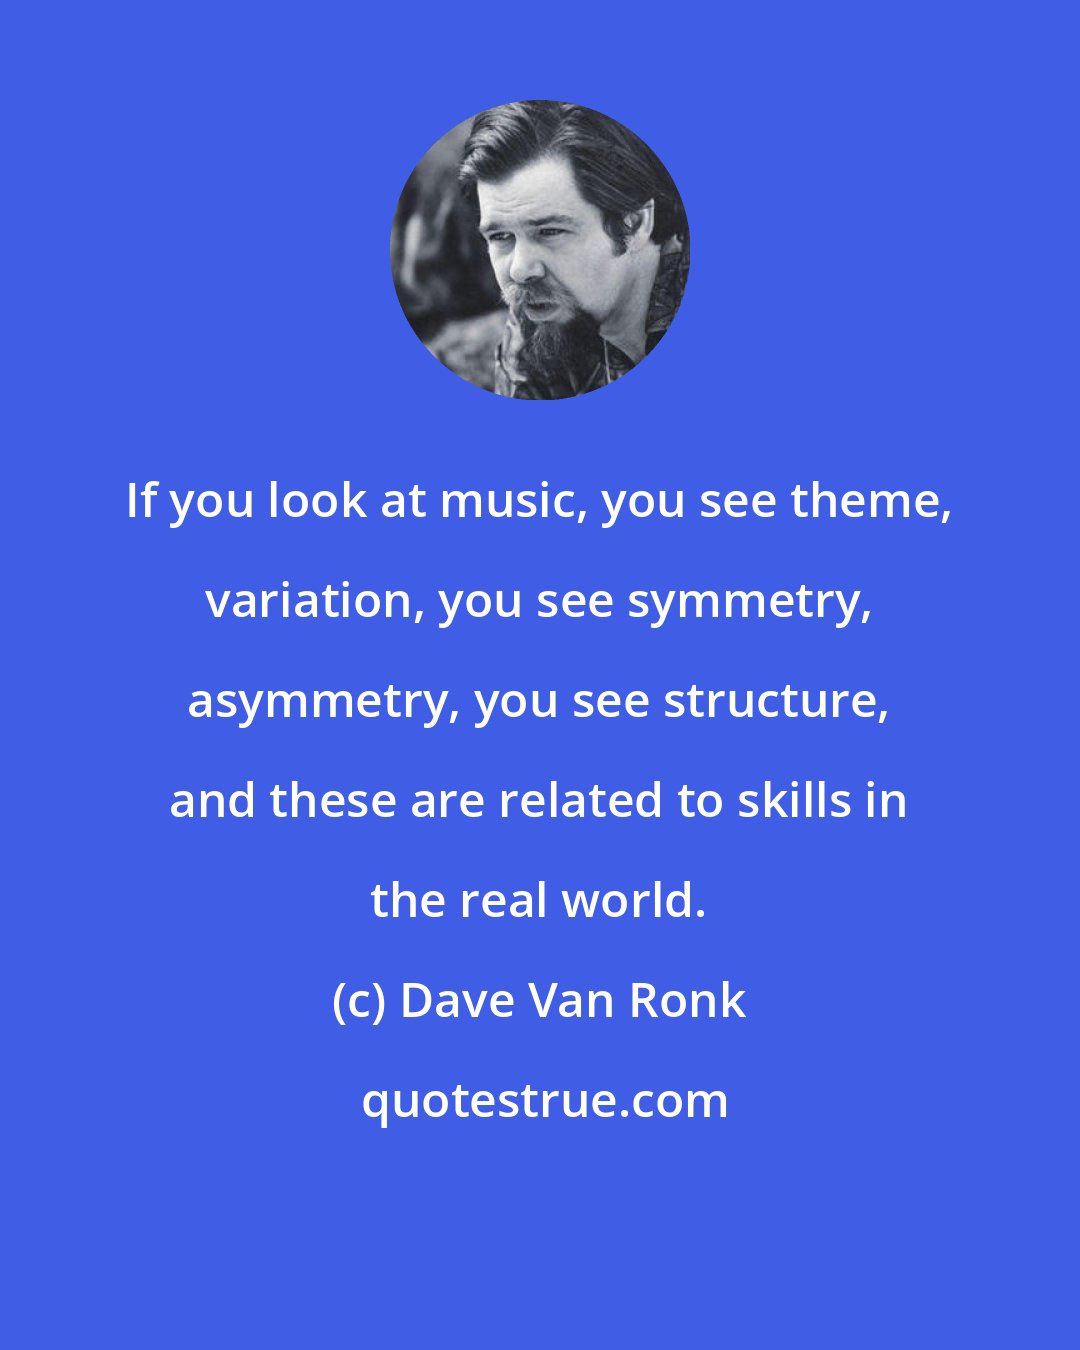 Dave Van Ronk: If you look at music, you see theme, variation, you see symmetry, asymmetry, you see structure, and these are related to skills in the real world.